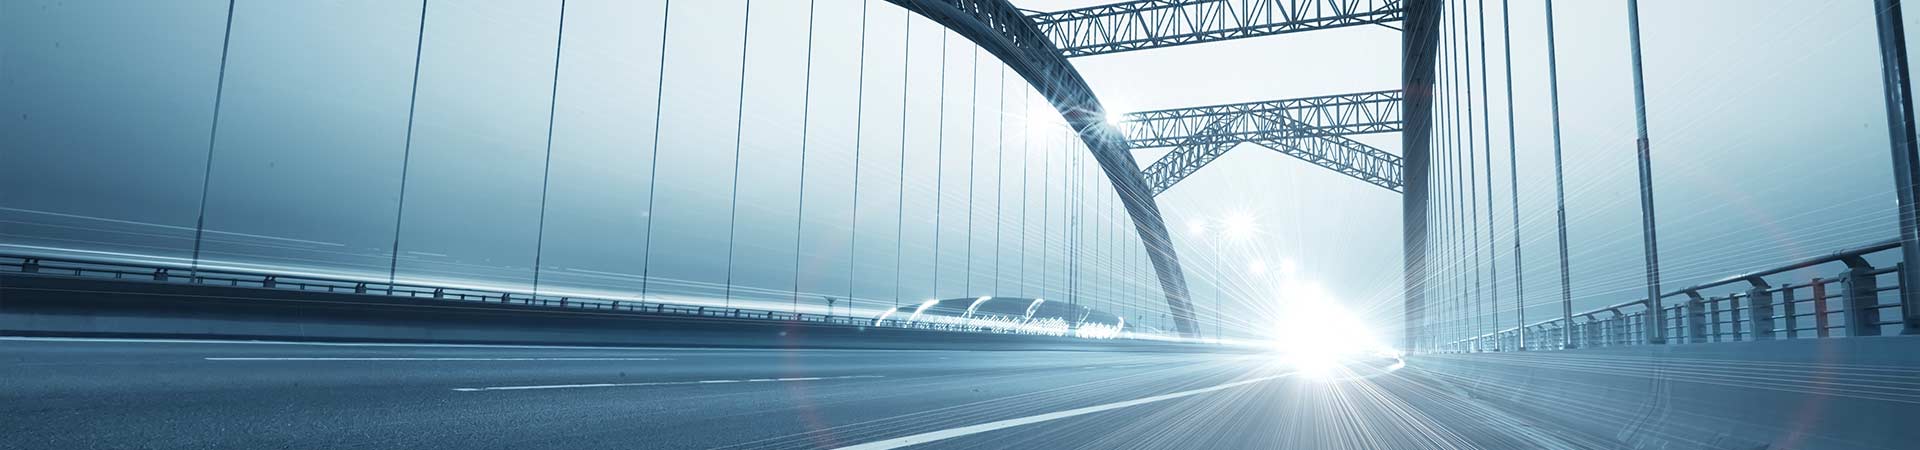 Bridging finance by brooklands commercial finance